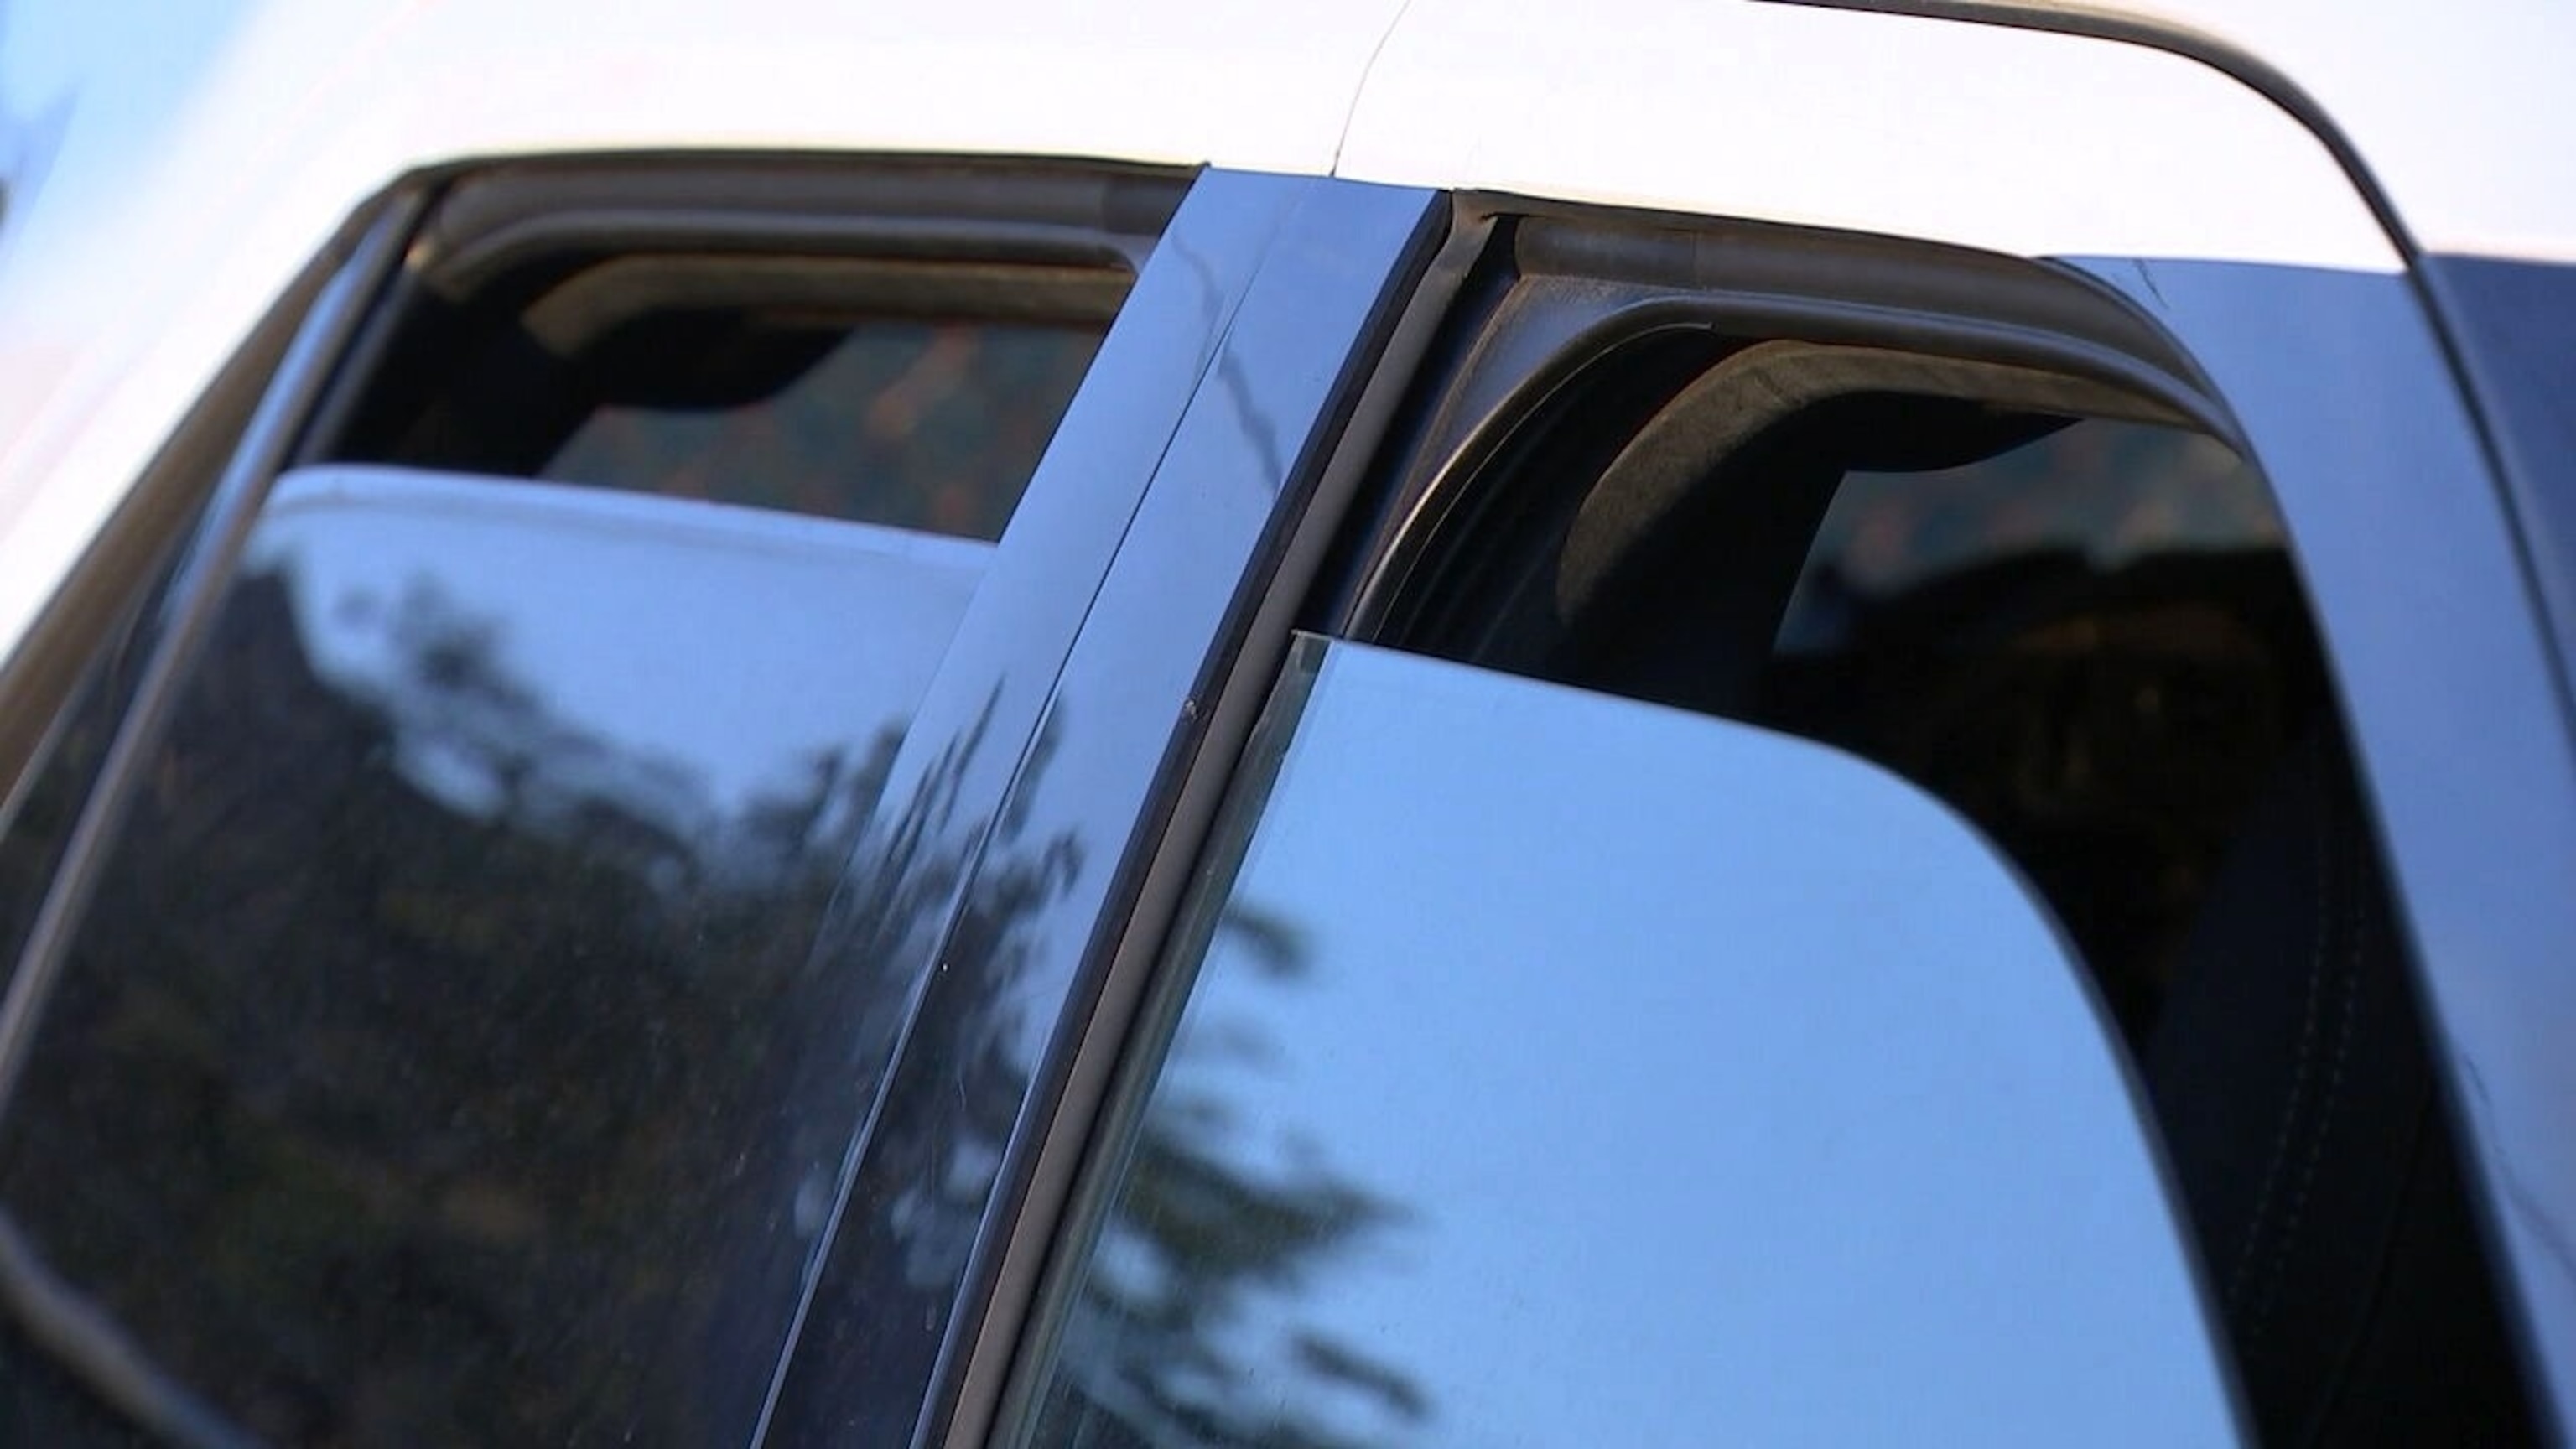 PHOTO: In this screen grab from a video, a car window is shown partially rolled down.